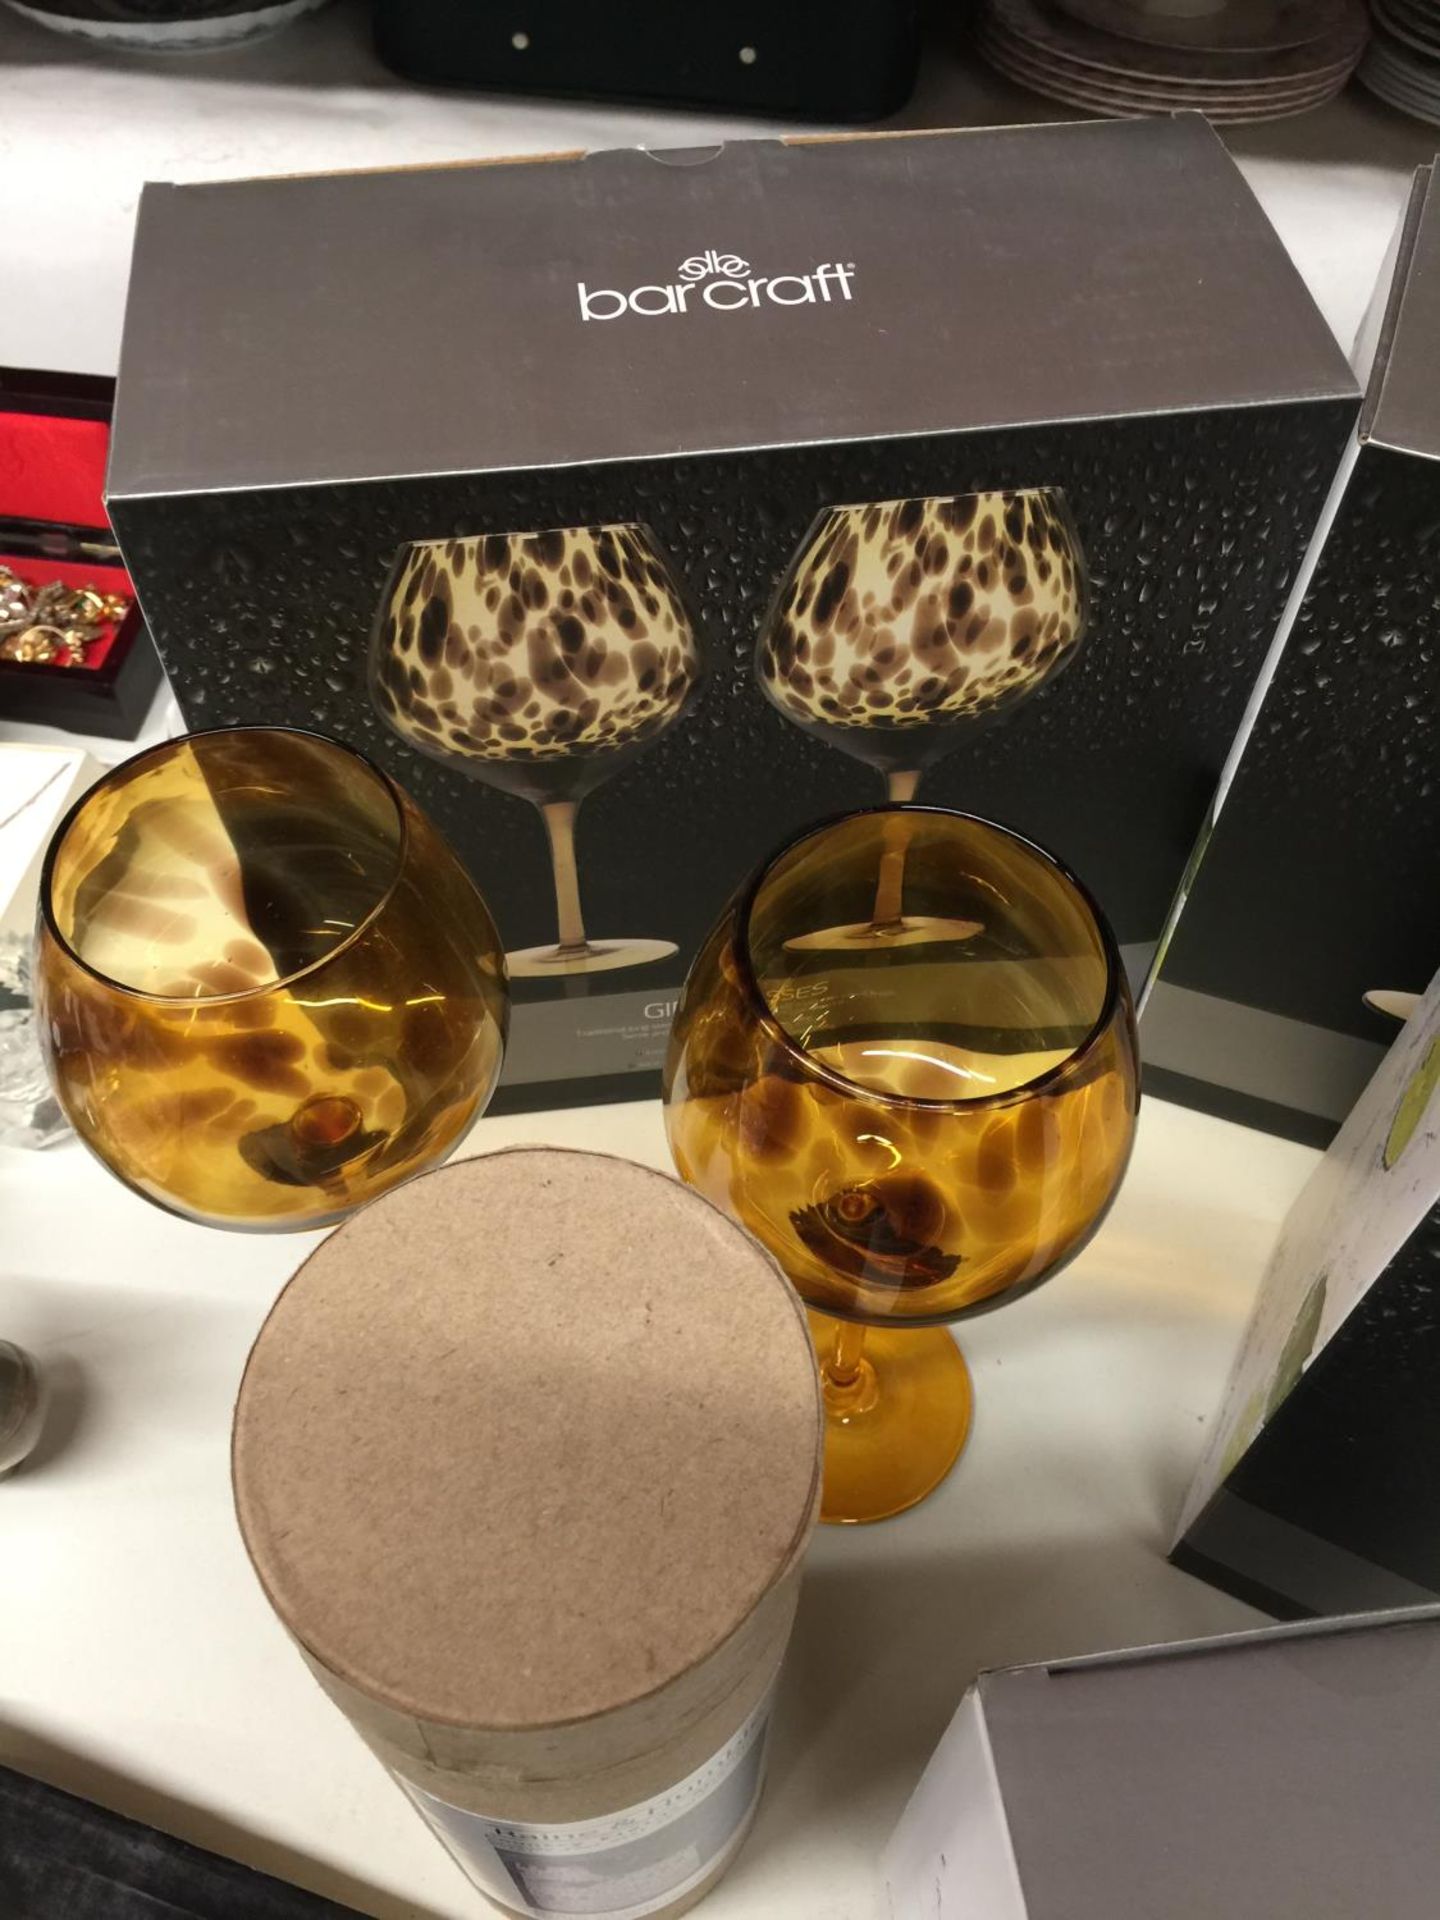 THREE BOXES EACH CONTAINING TWO BARCRAFT GIN GLASSES WITH A TORTOISHELL COLOURING, A BOXED COPPER - Image 3 of 5